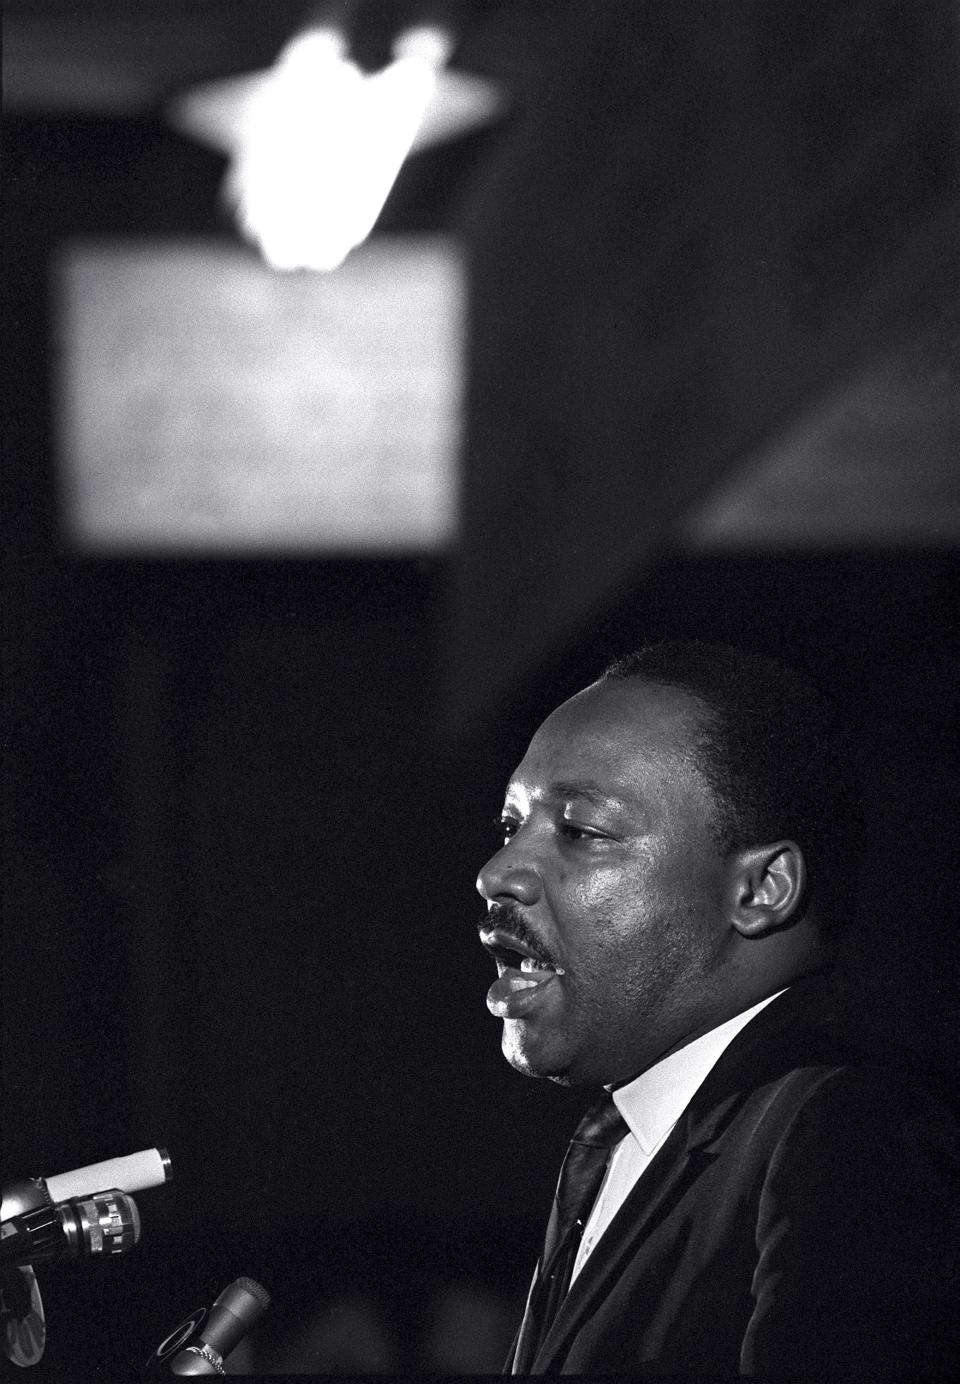 In this April 3, 1968, file photo, Dr. Martin Luther King Jr. makes his last public appearance at the Mason Temple in Memphis, Tennessee. The following day King was assassinated on his motel balcony.